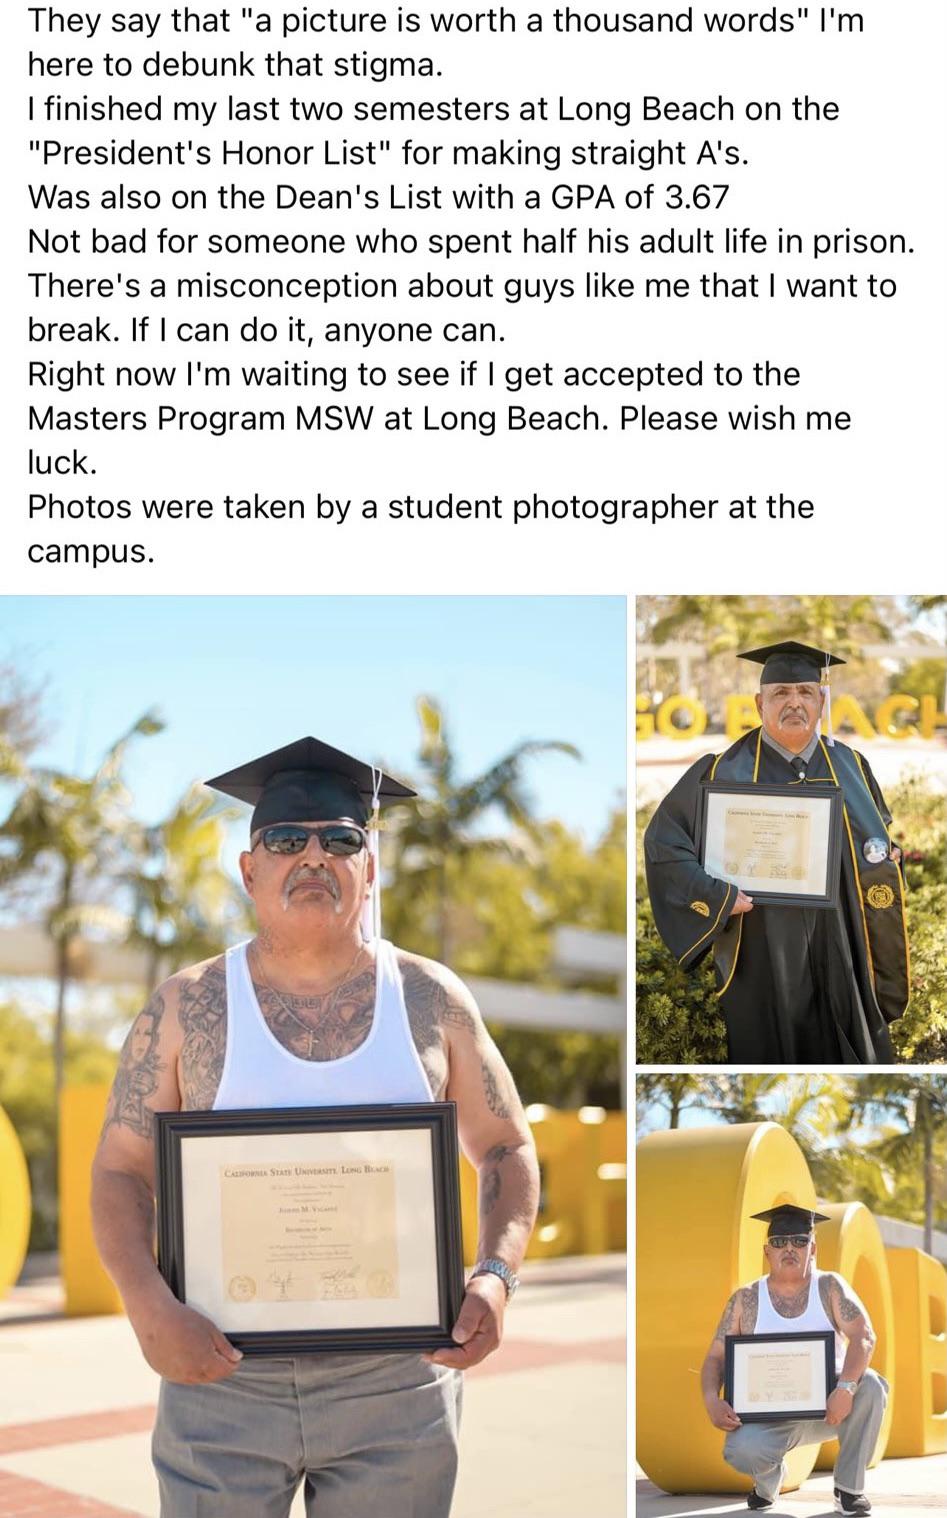 joseph valadez csulb - They say that "a picture is worth a thousand words" I'm here to debunk that stigma. I finished my last two semesters at Long Beach on the "President's Honor List" for making straight A's. Was also on the Dean's List with a Gpa of 3.